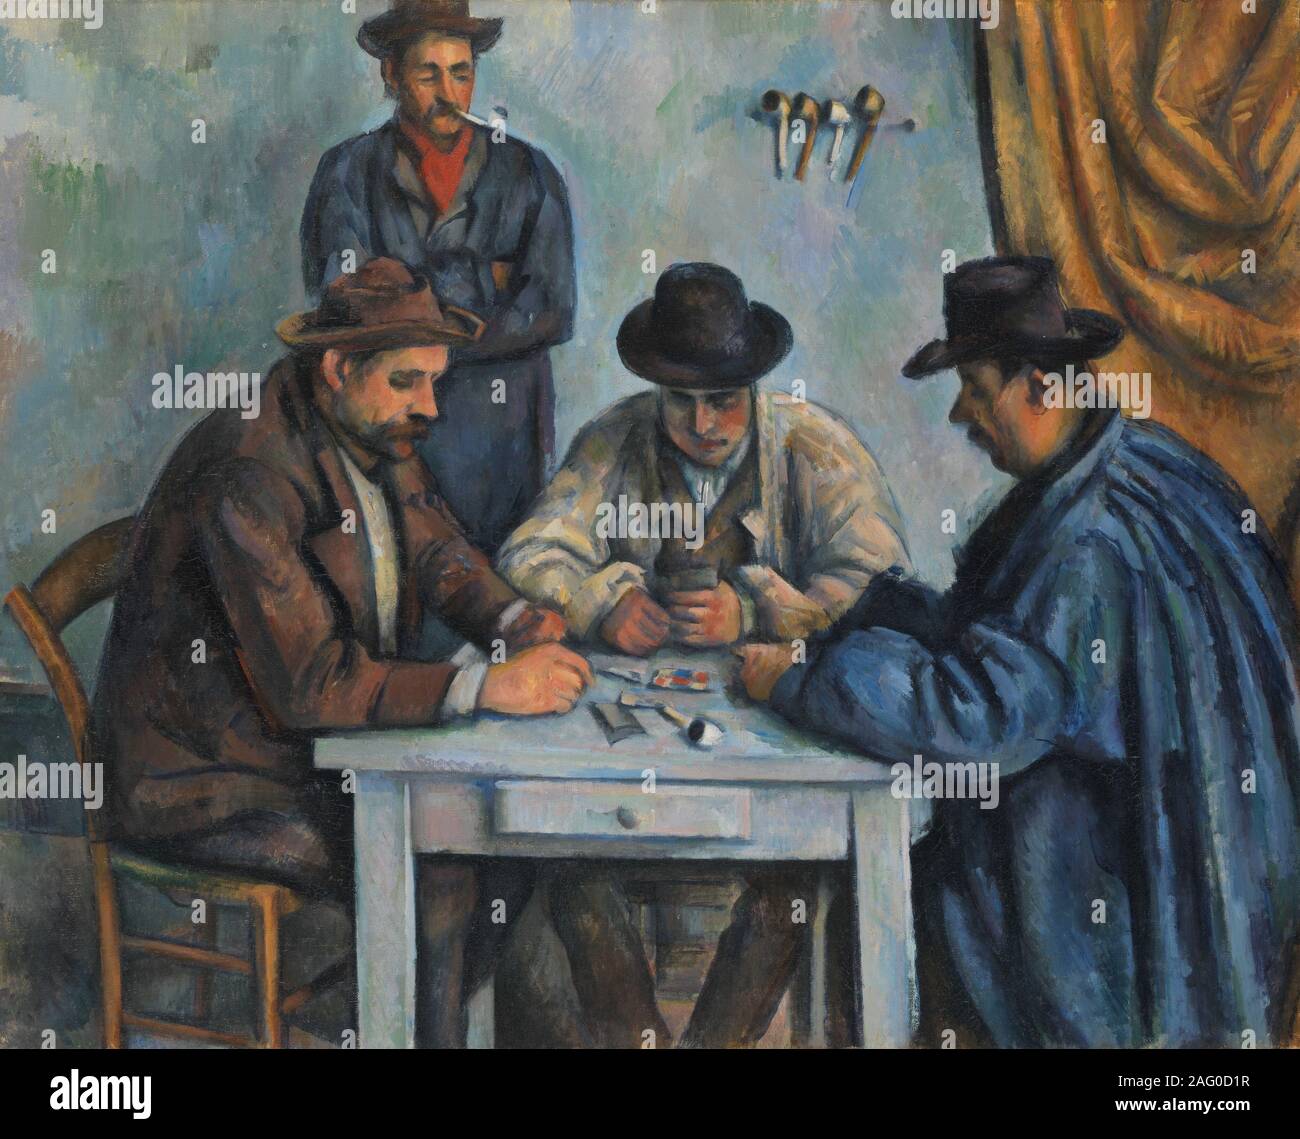 The Card Players, 1890-92. Stock Photo